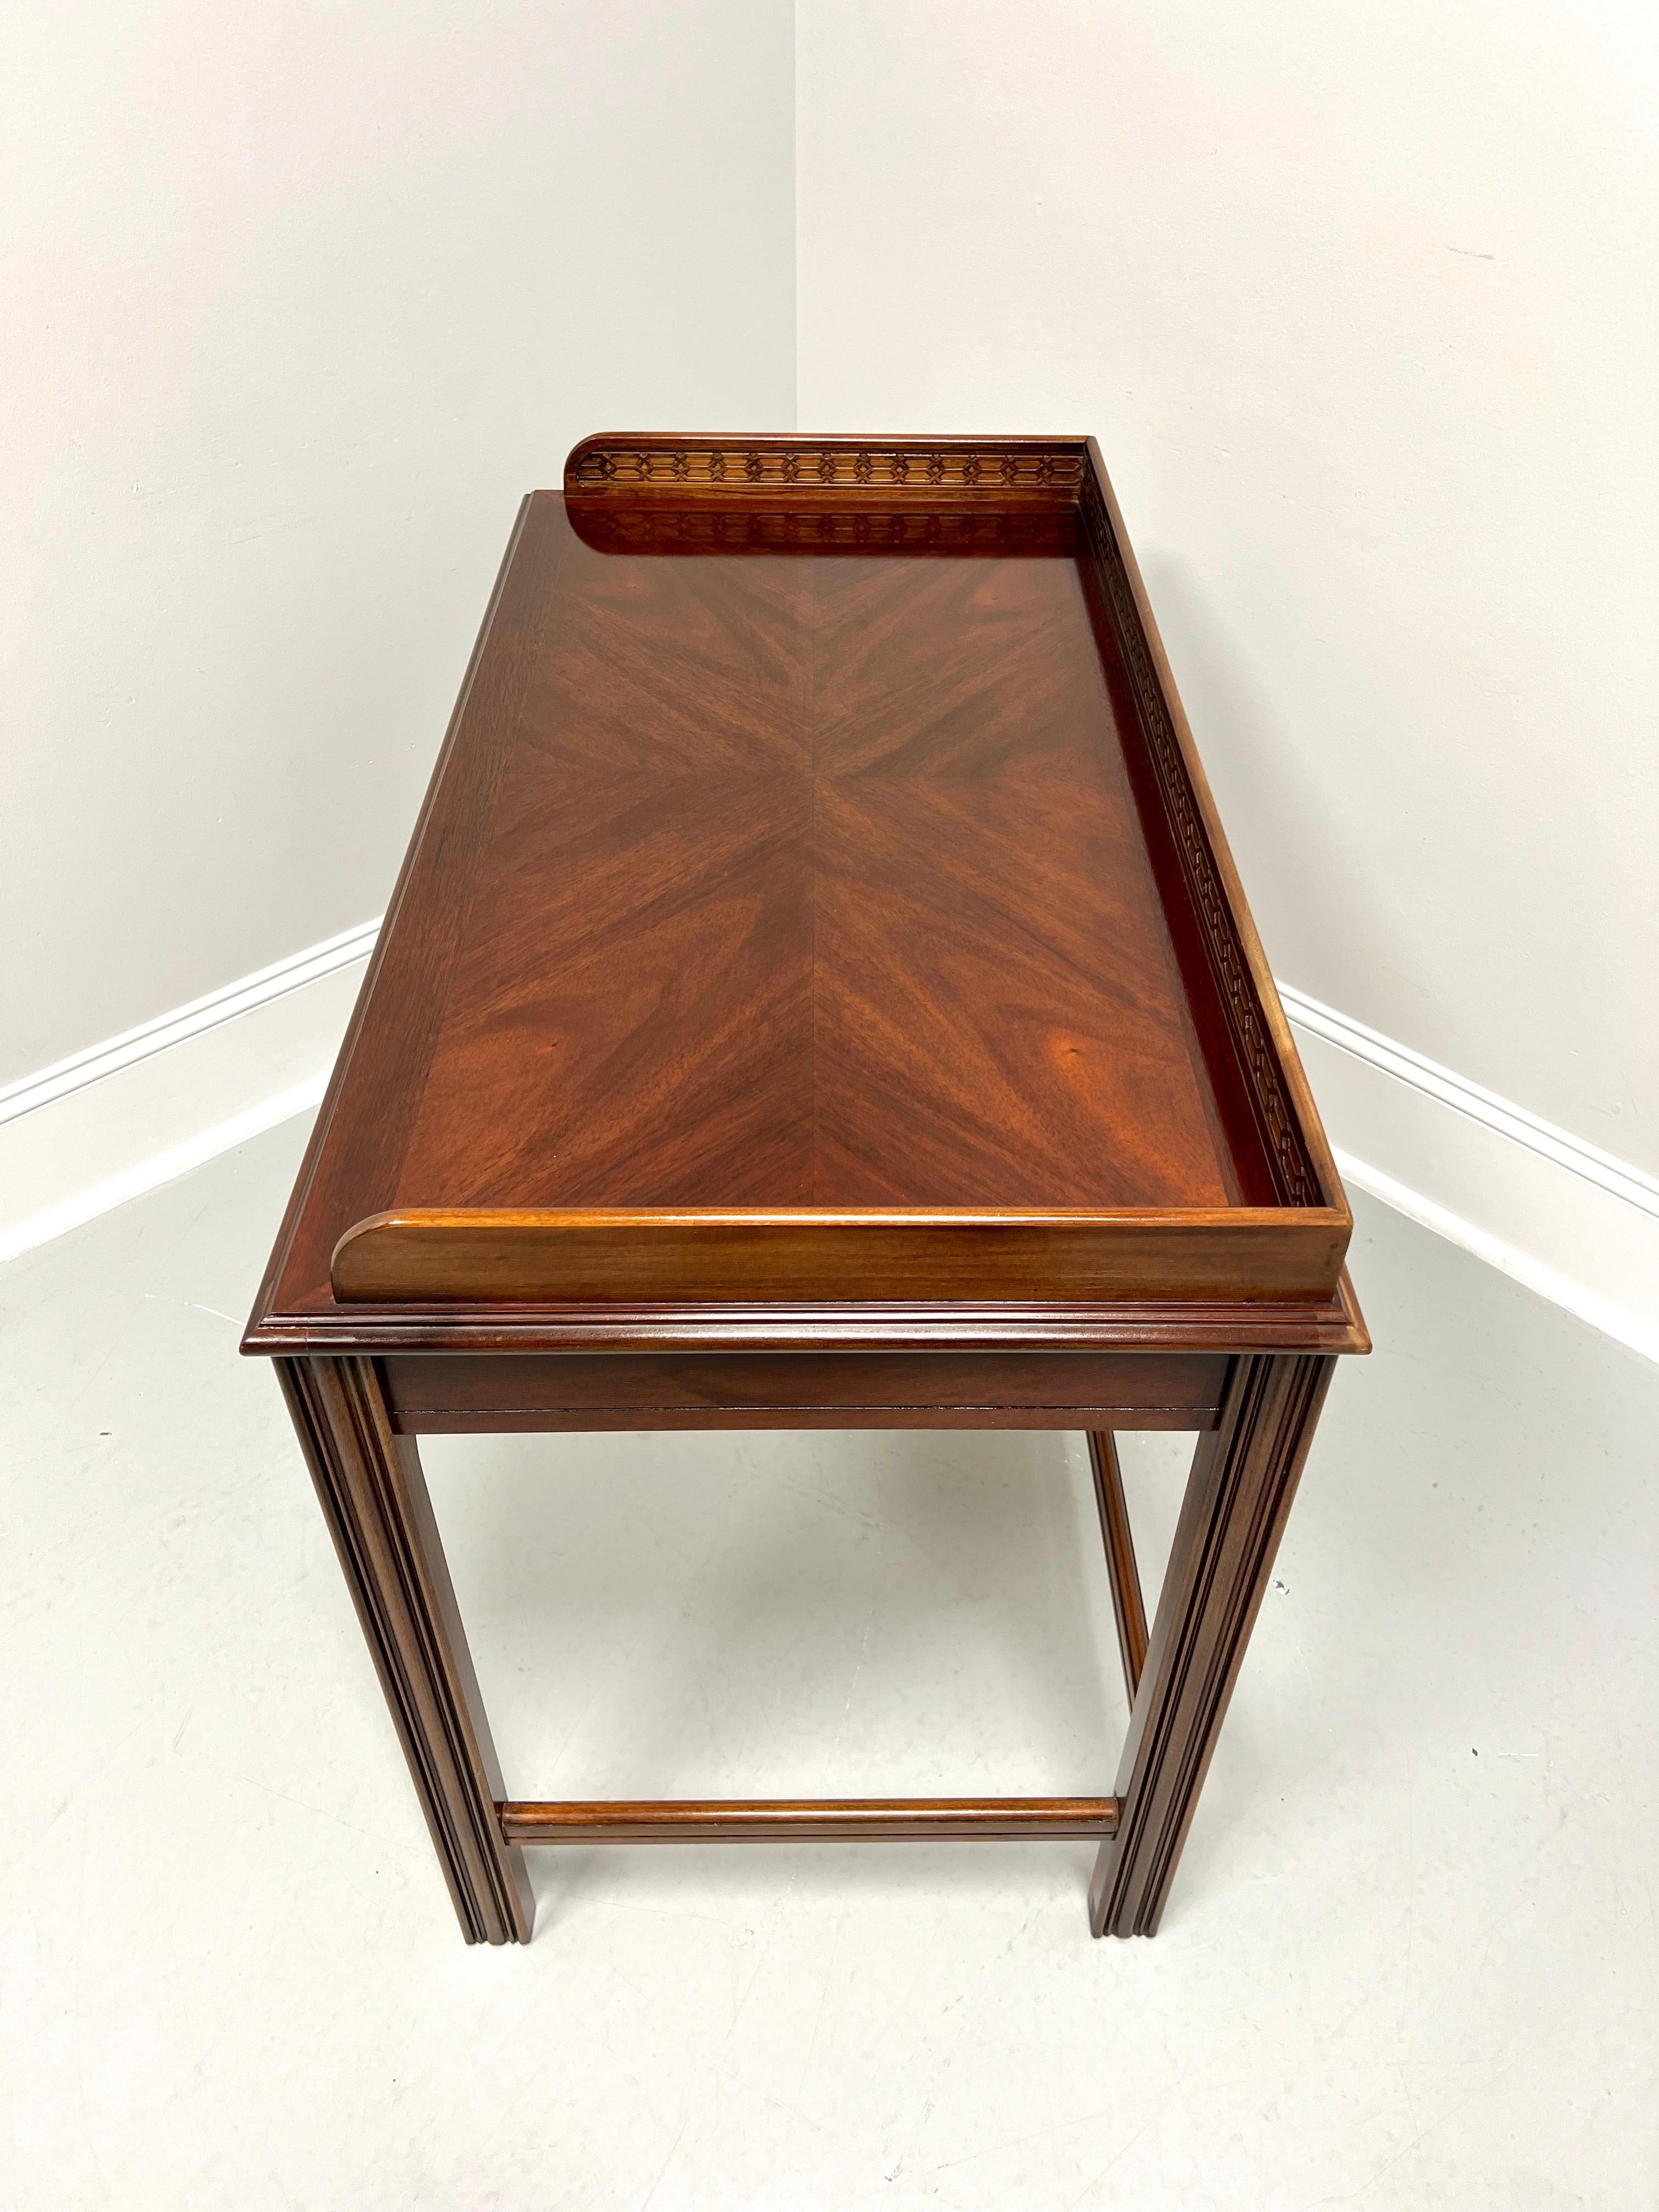 LANE Altavista Mahogany Chippendale Bookmatched Writing Desk In Good Condition For Sale In Charlotte, NC